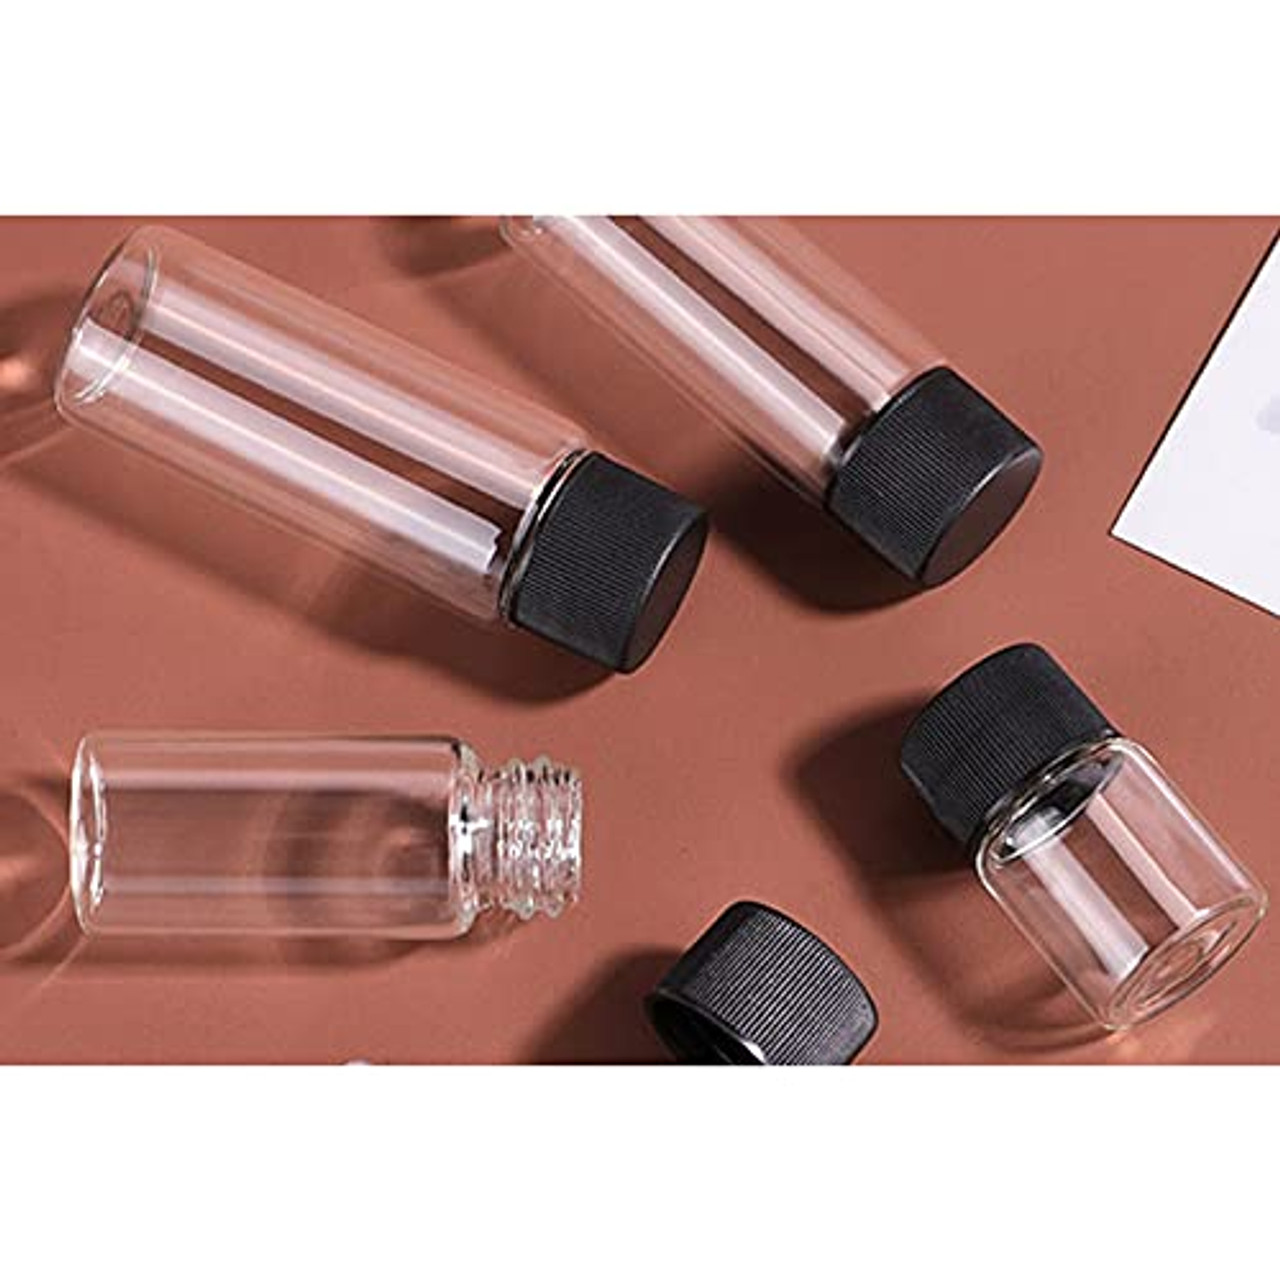 Cadbibe 80ml Glass Clear Test Tubes with Screw Caps and Plastic Stoppers,  Liquid Sample Vial, Leak-Proof Flat Test Tubes, 6PCS - Yahoo Shopping